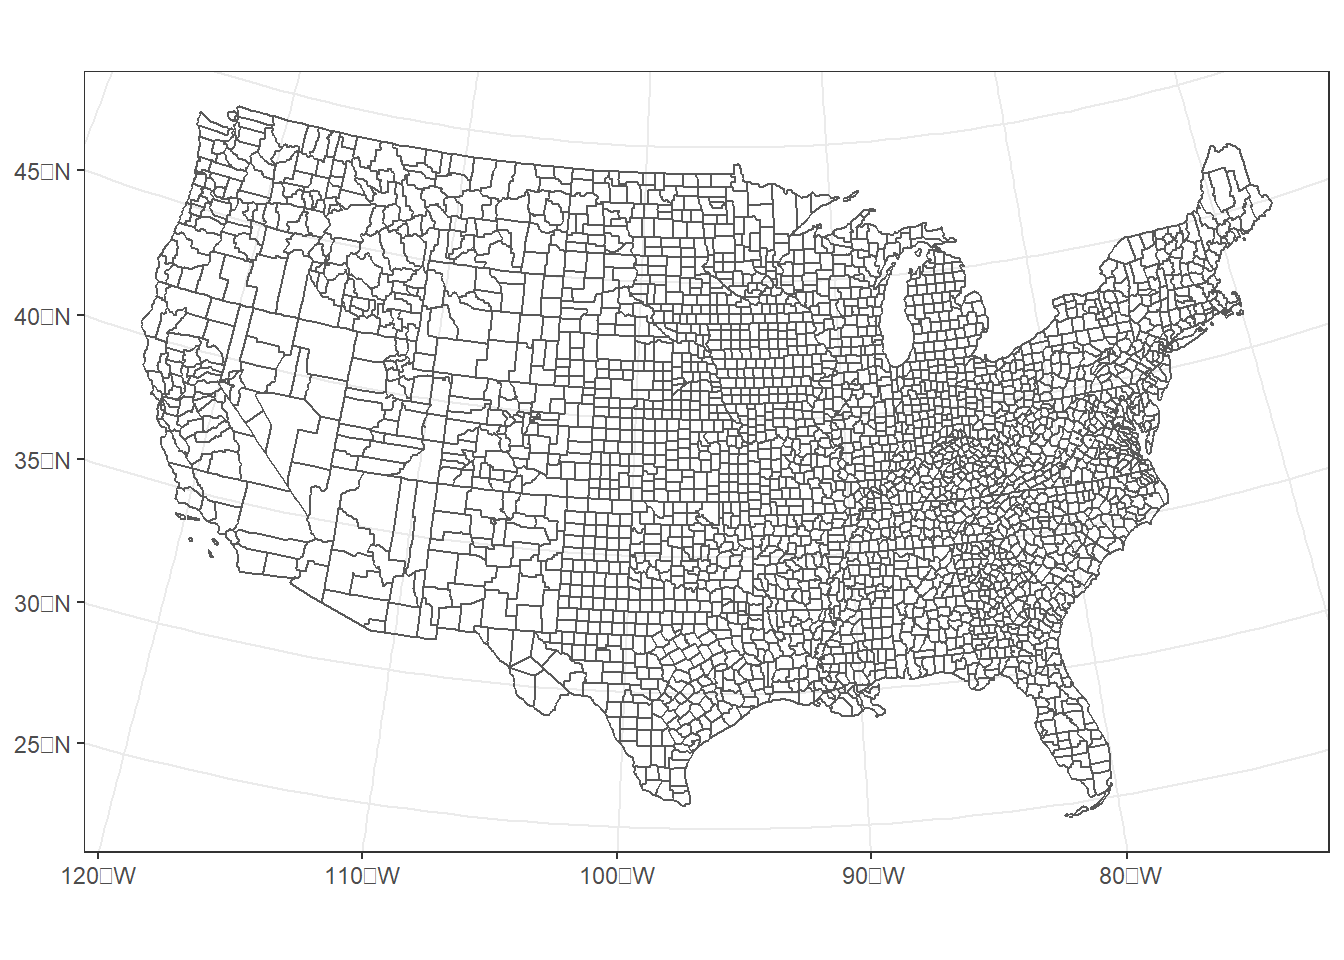 U.S. counties projected back to an Albers Equal Area coordinate system for the conterminous United States.